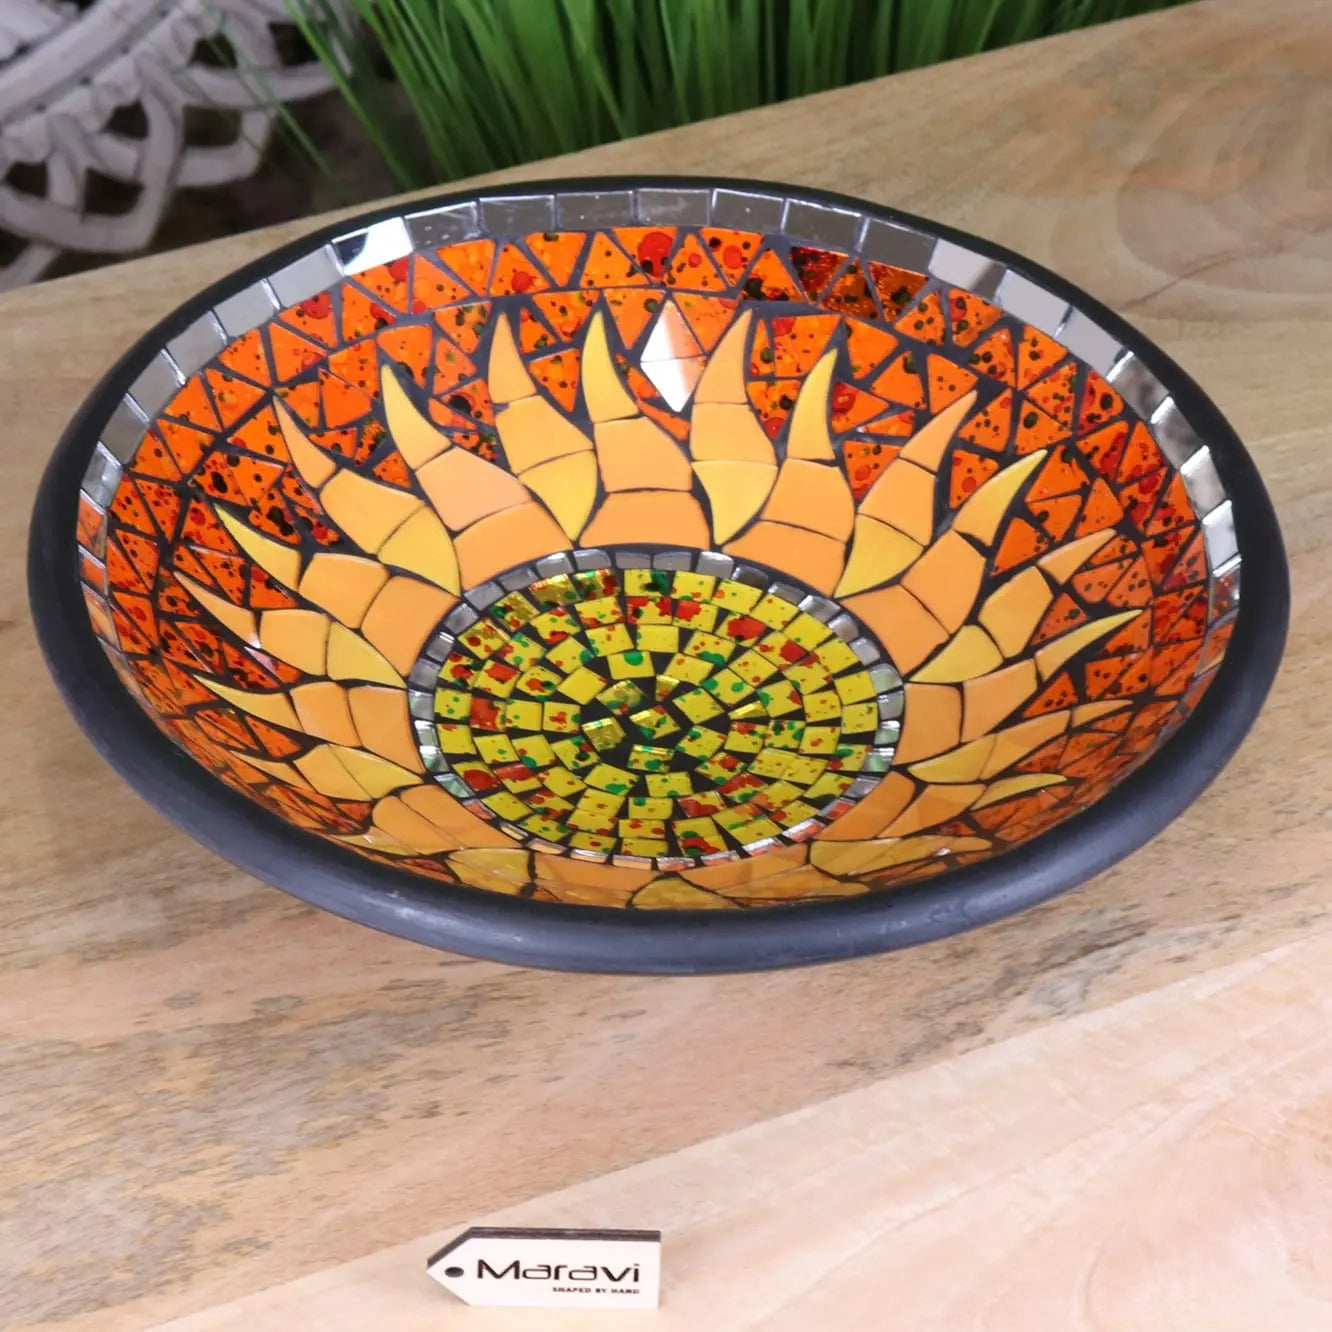 Surya Mosaic Bowl 30cm Sun Design Yellow and Red - Angled Top View